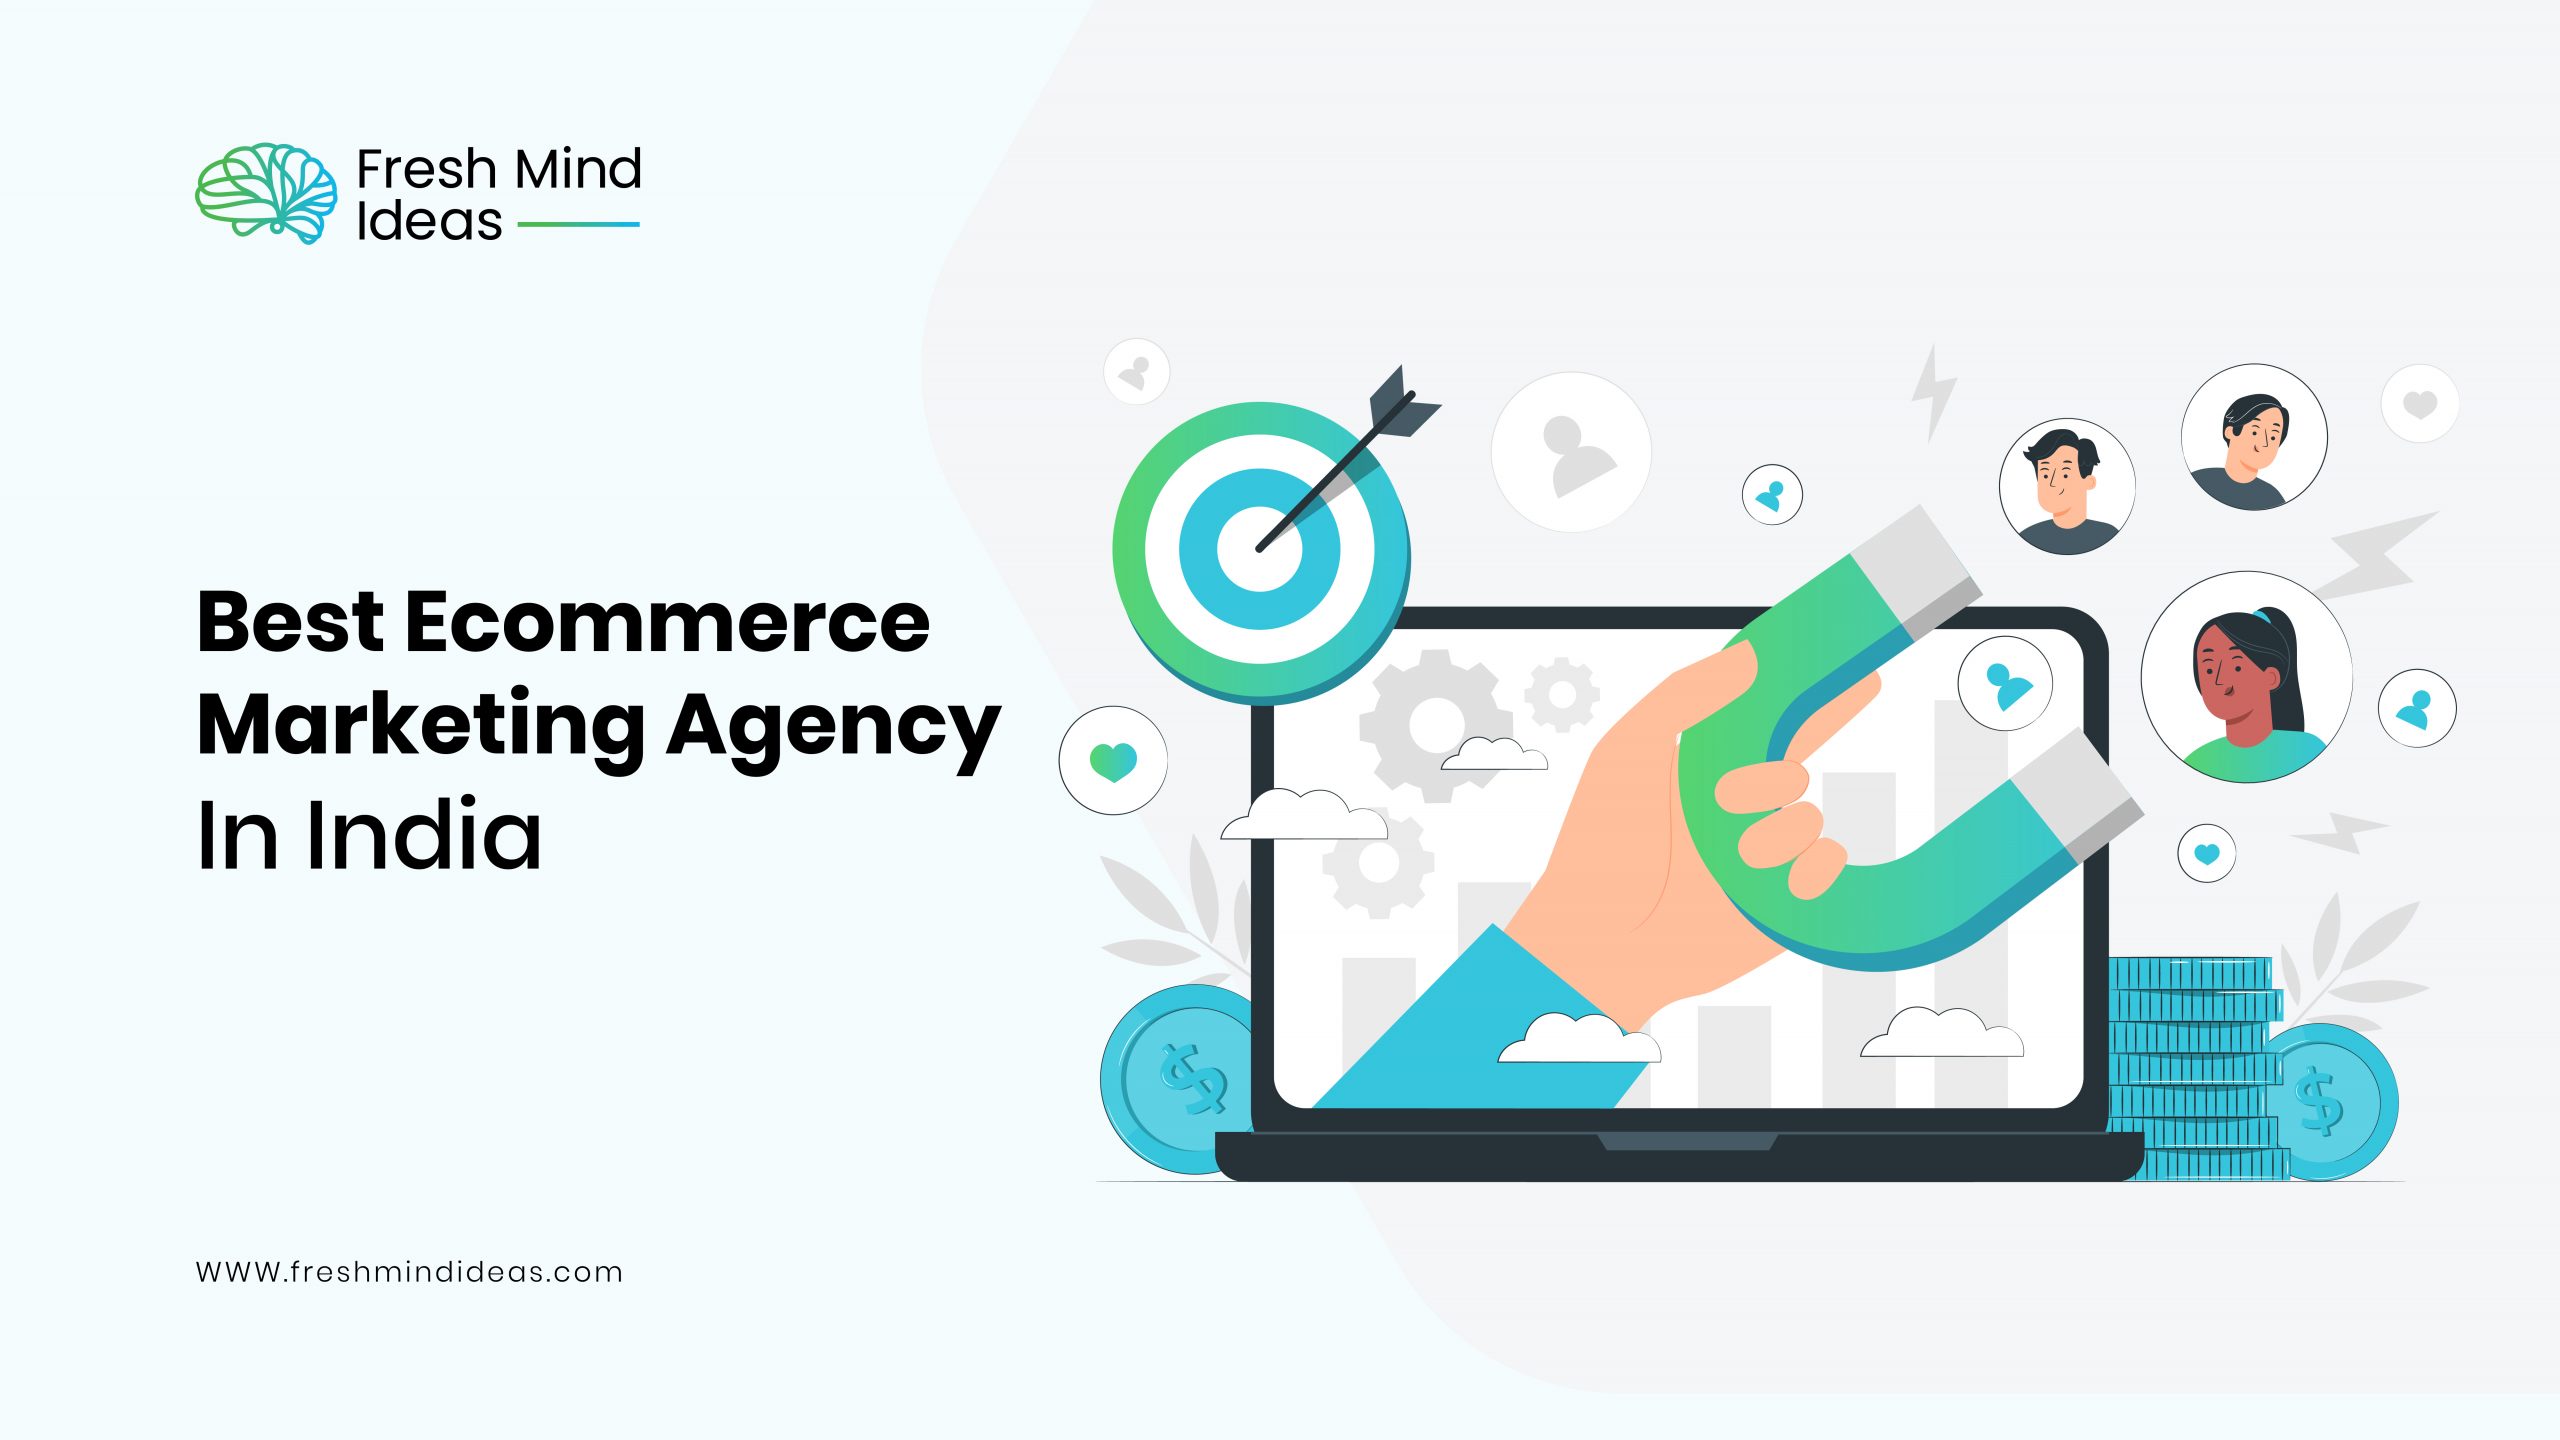 Best Ecommerce Marketing Agency In India